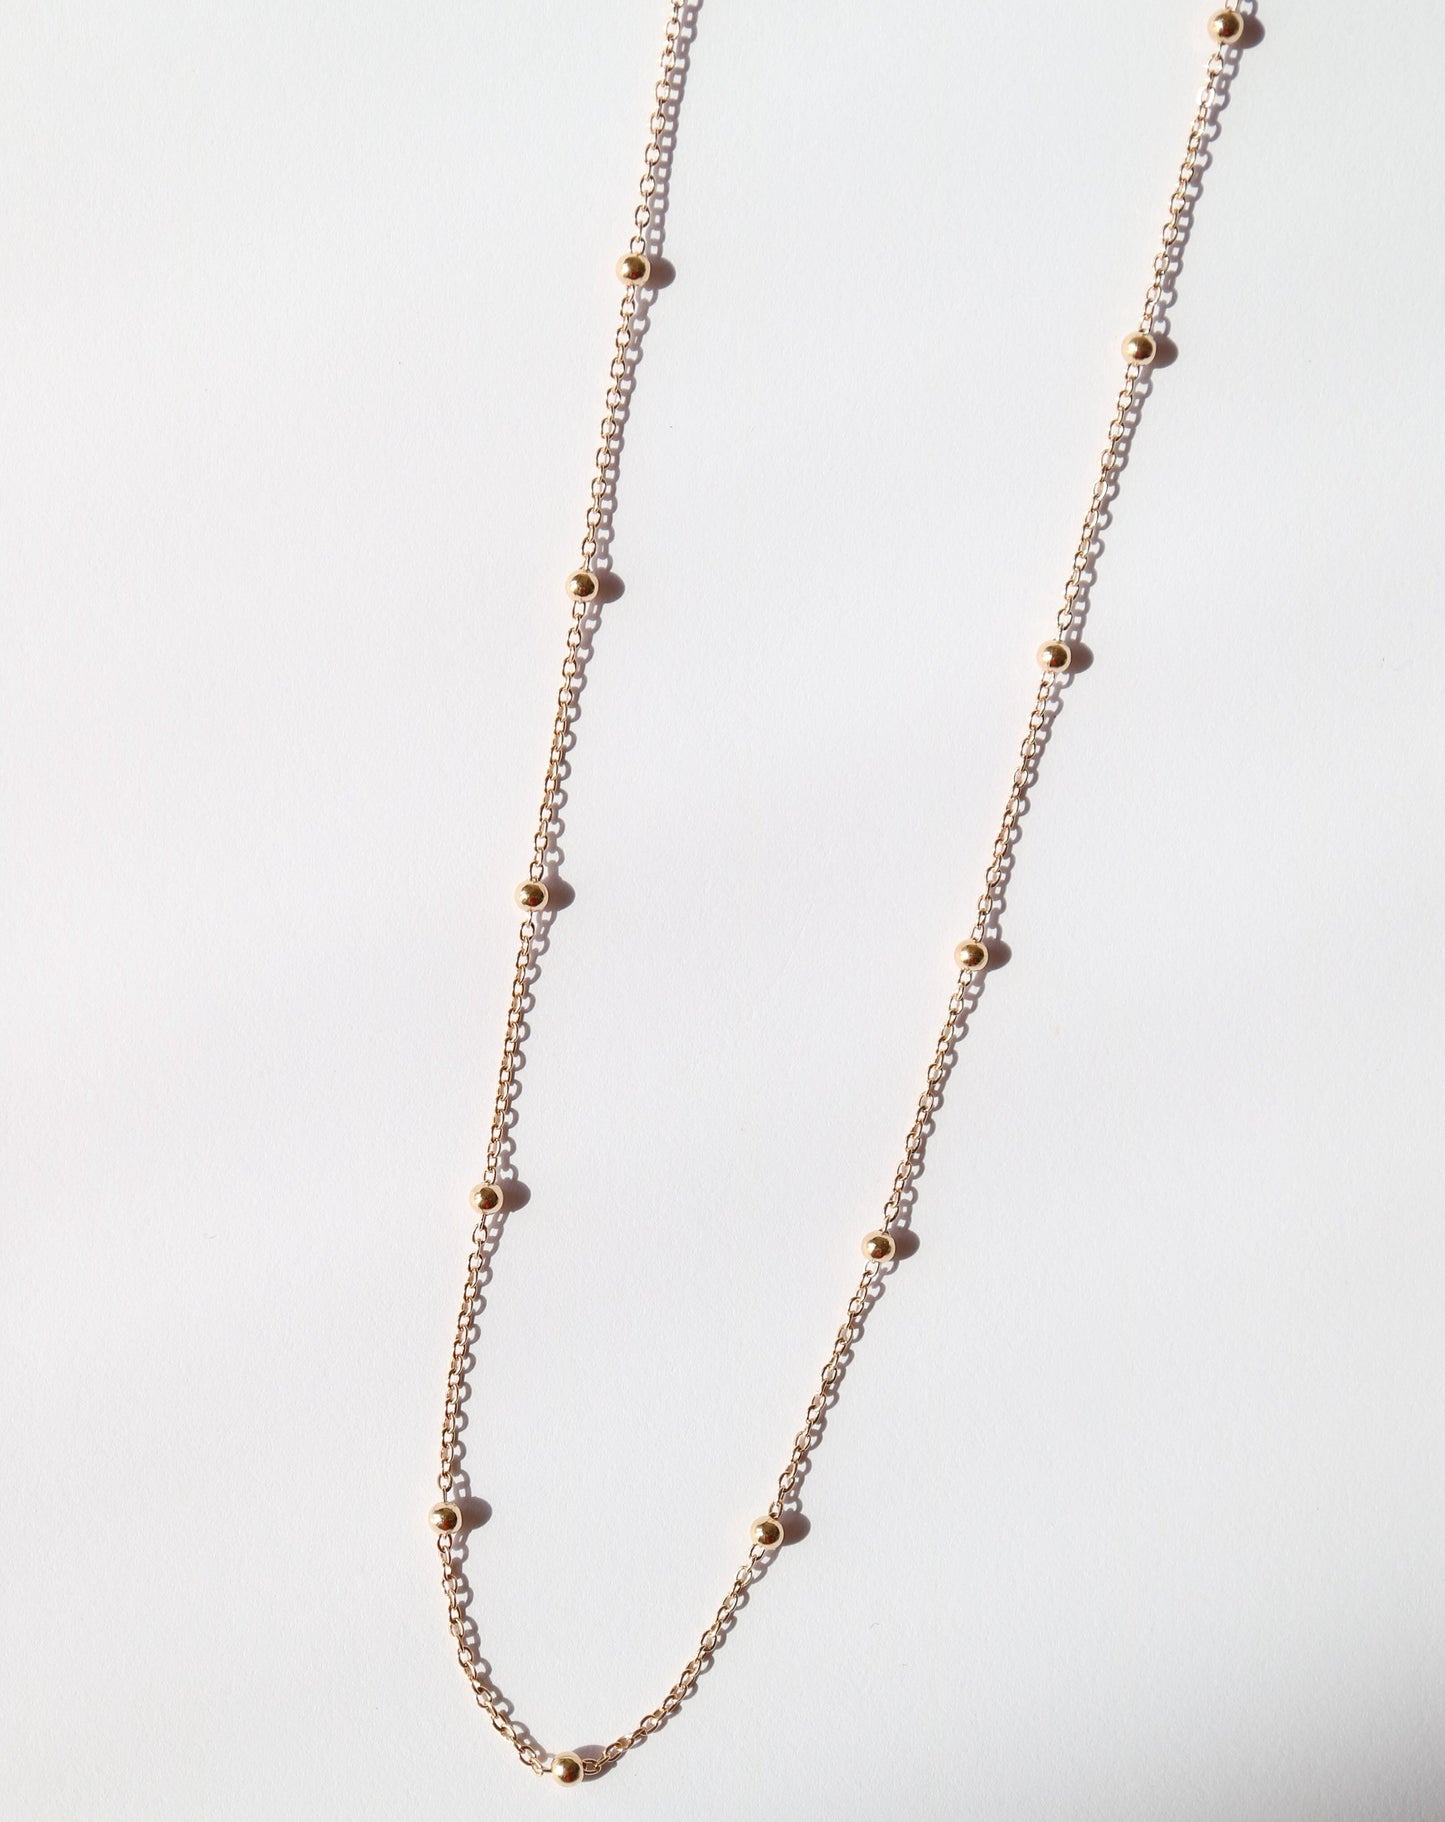 9ct gold Beaded Chain